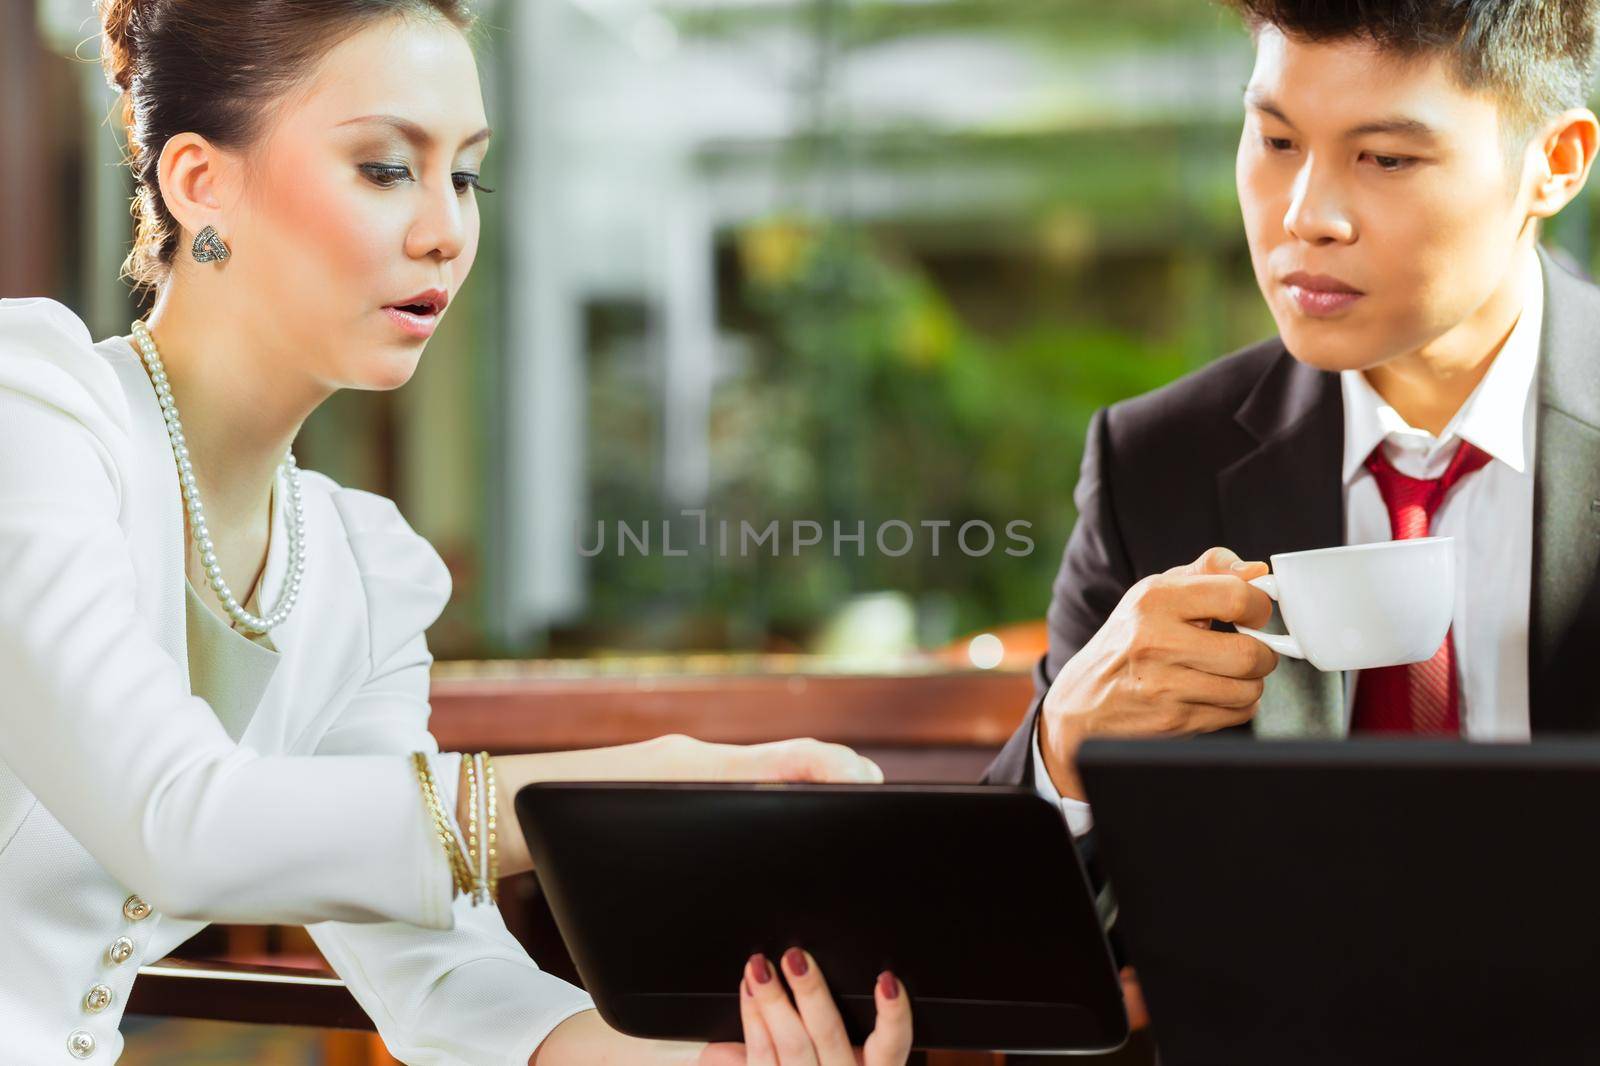 Two Asian Chinese office people or businessman and businesswoman having a business meeting in a hotel lobby discussing documents on a tablet computer while drinking coffee